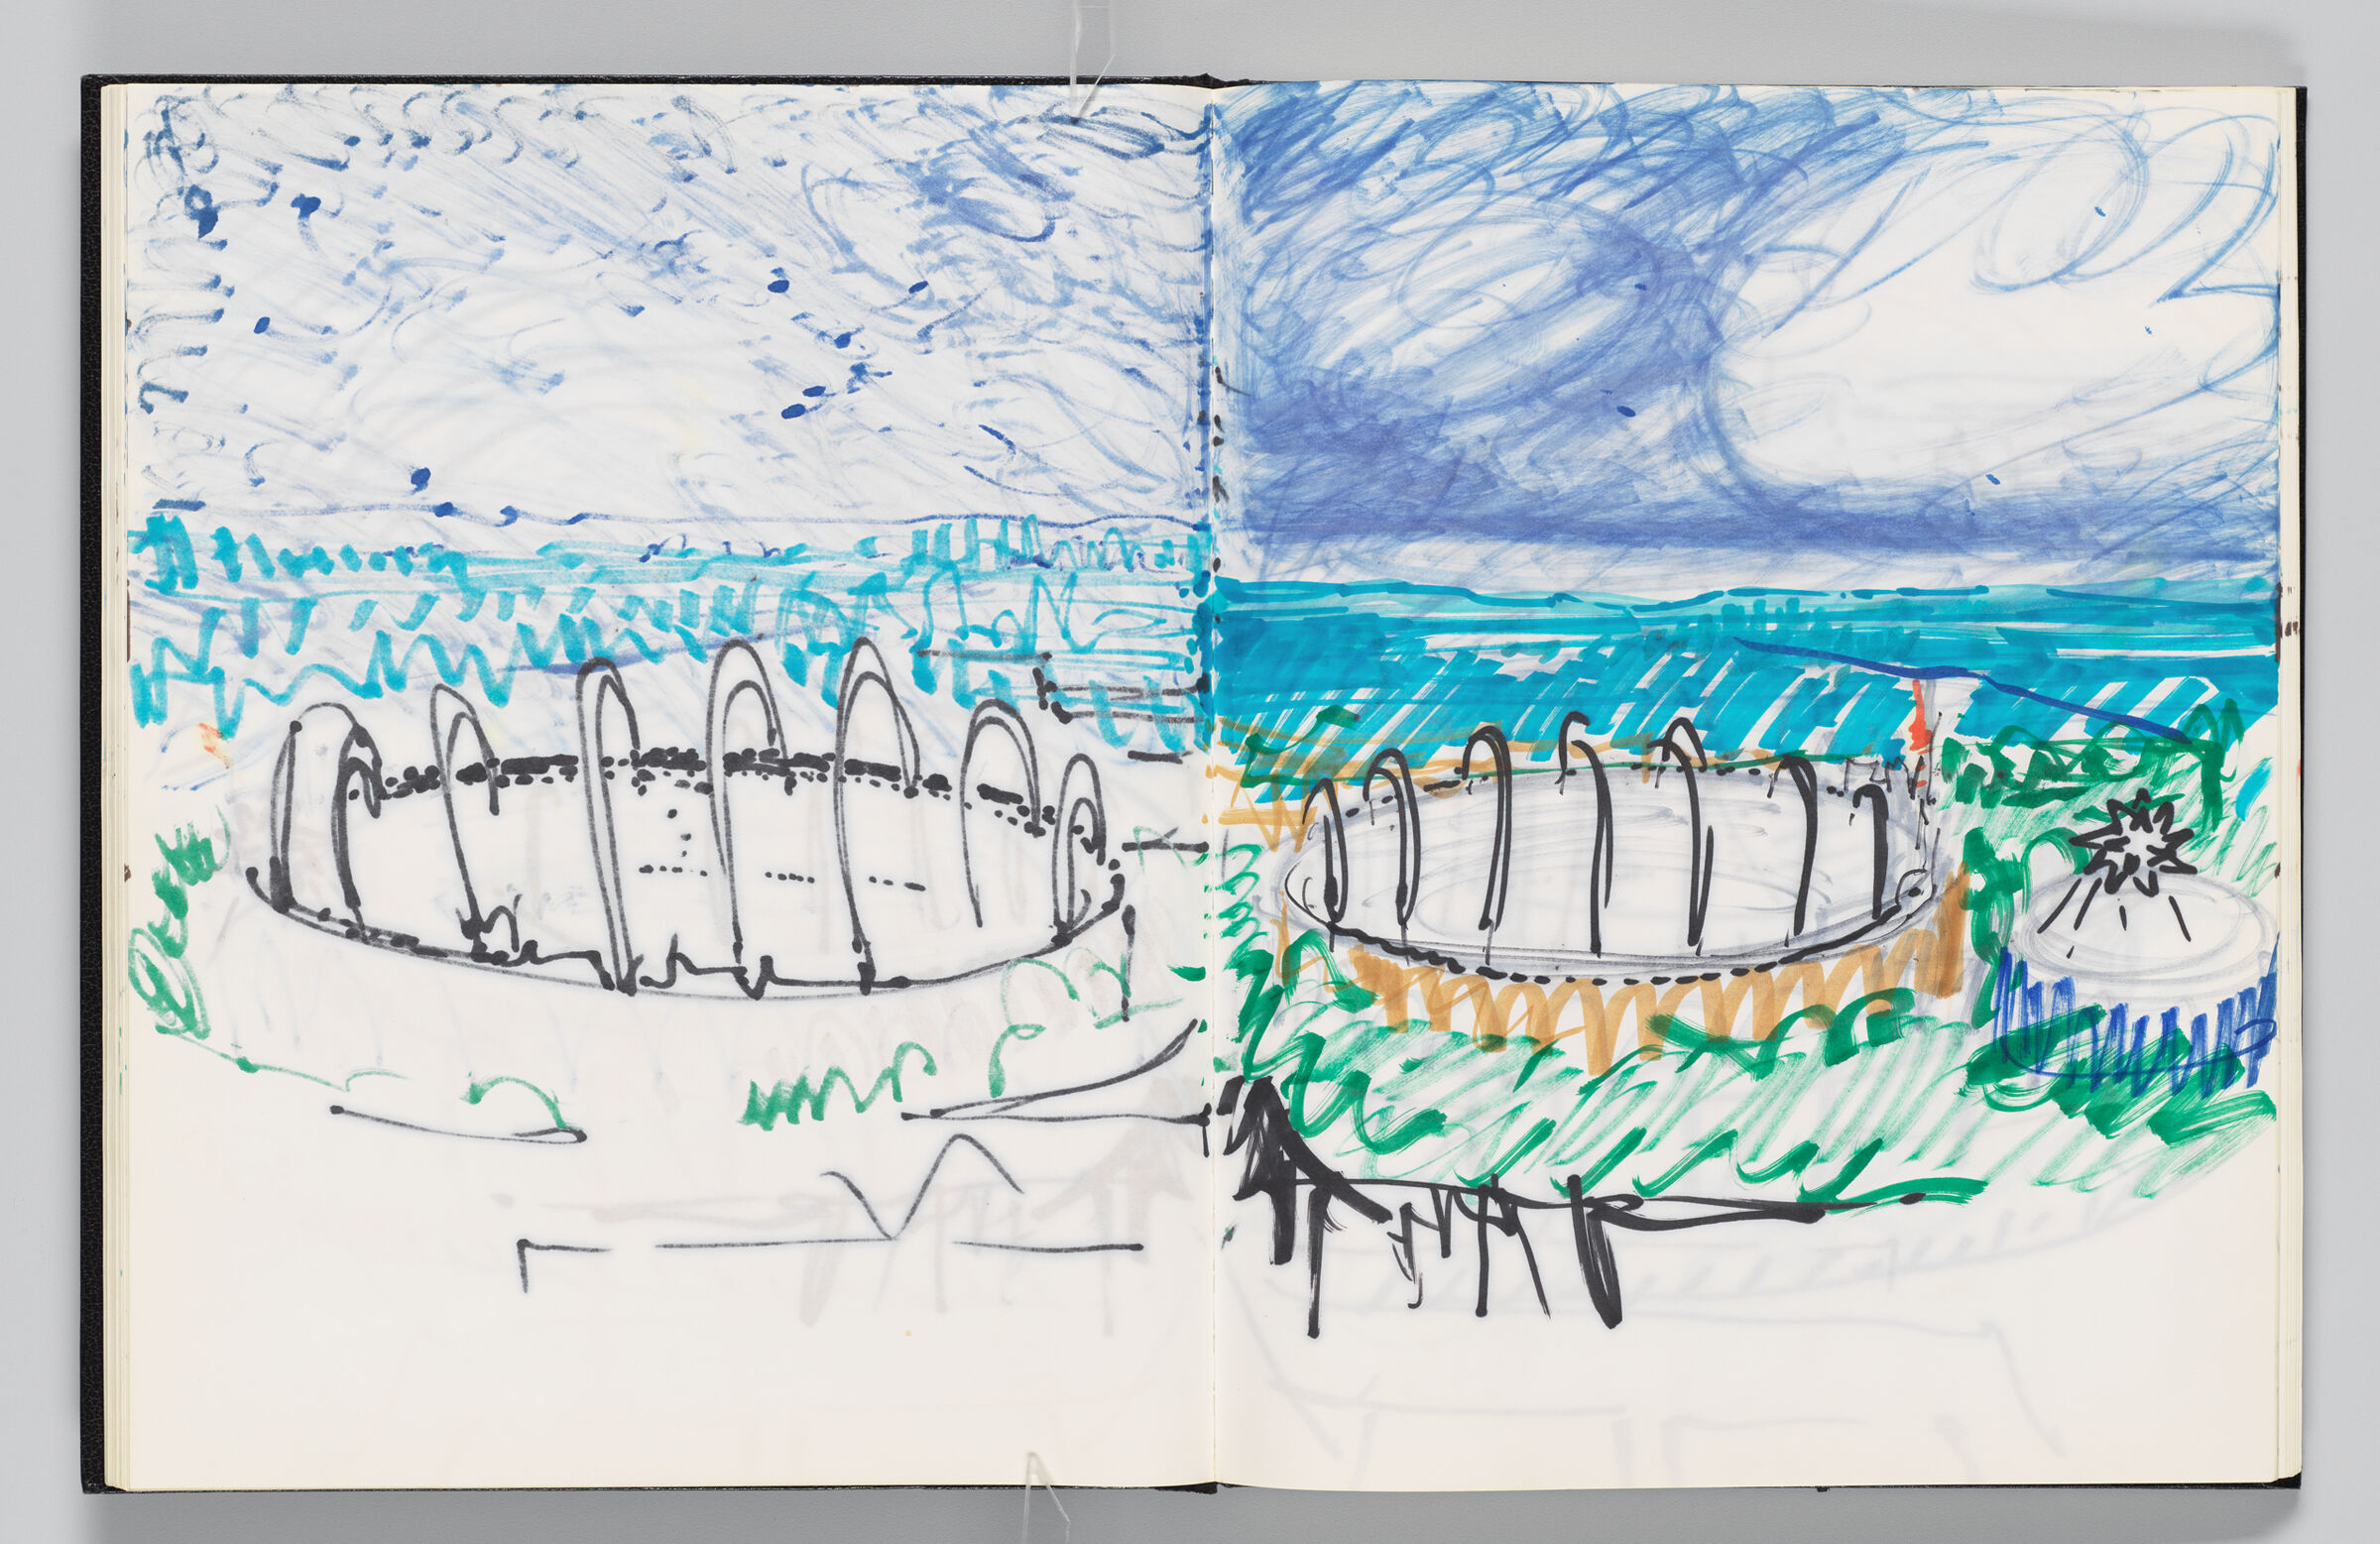 Untitled (Bleed-Through Of Previous Page, Left Page); Untitled (Rainbows Over L.a. Memorial Coliseum And Inflatable Over Memorial Sports Arena, Right Page)